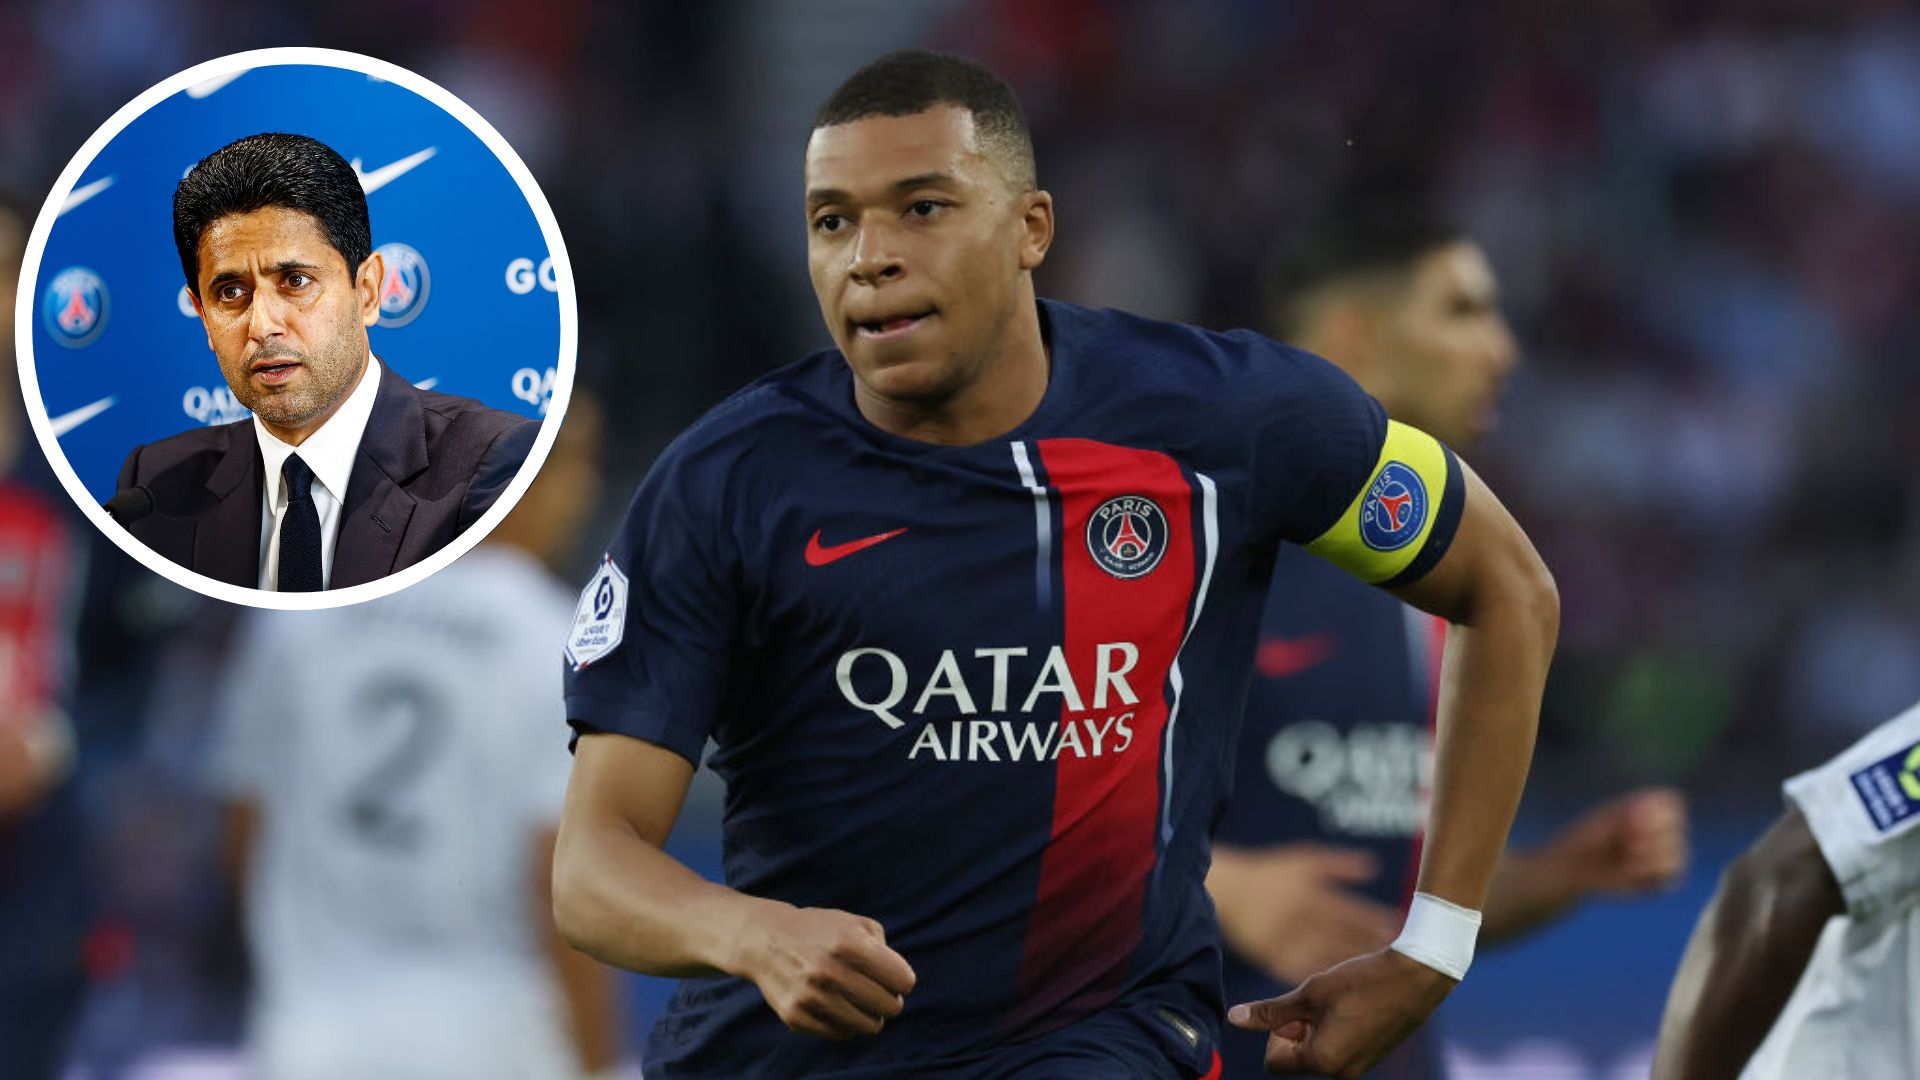 Kylian Mbappe and team will travel by train under new climate